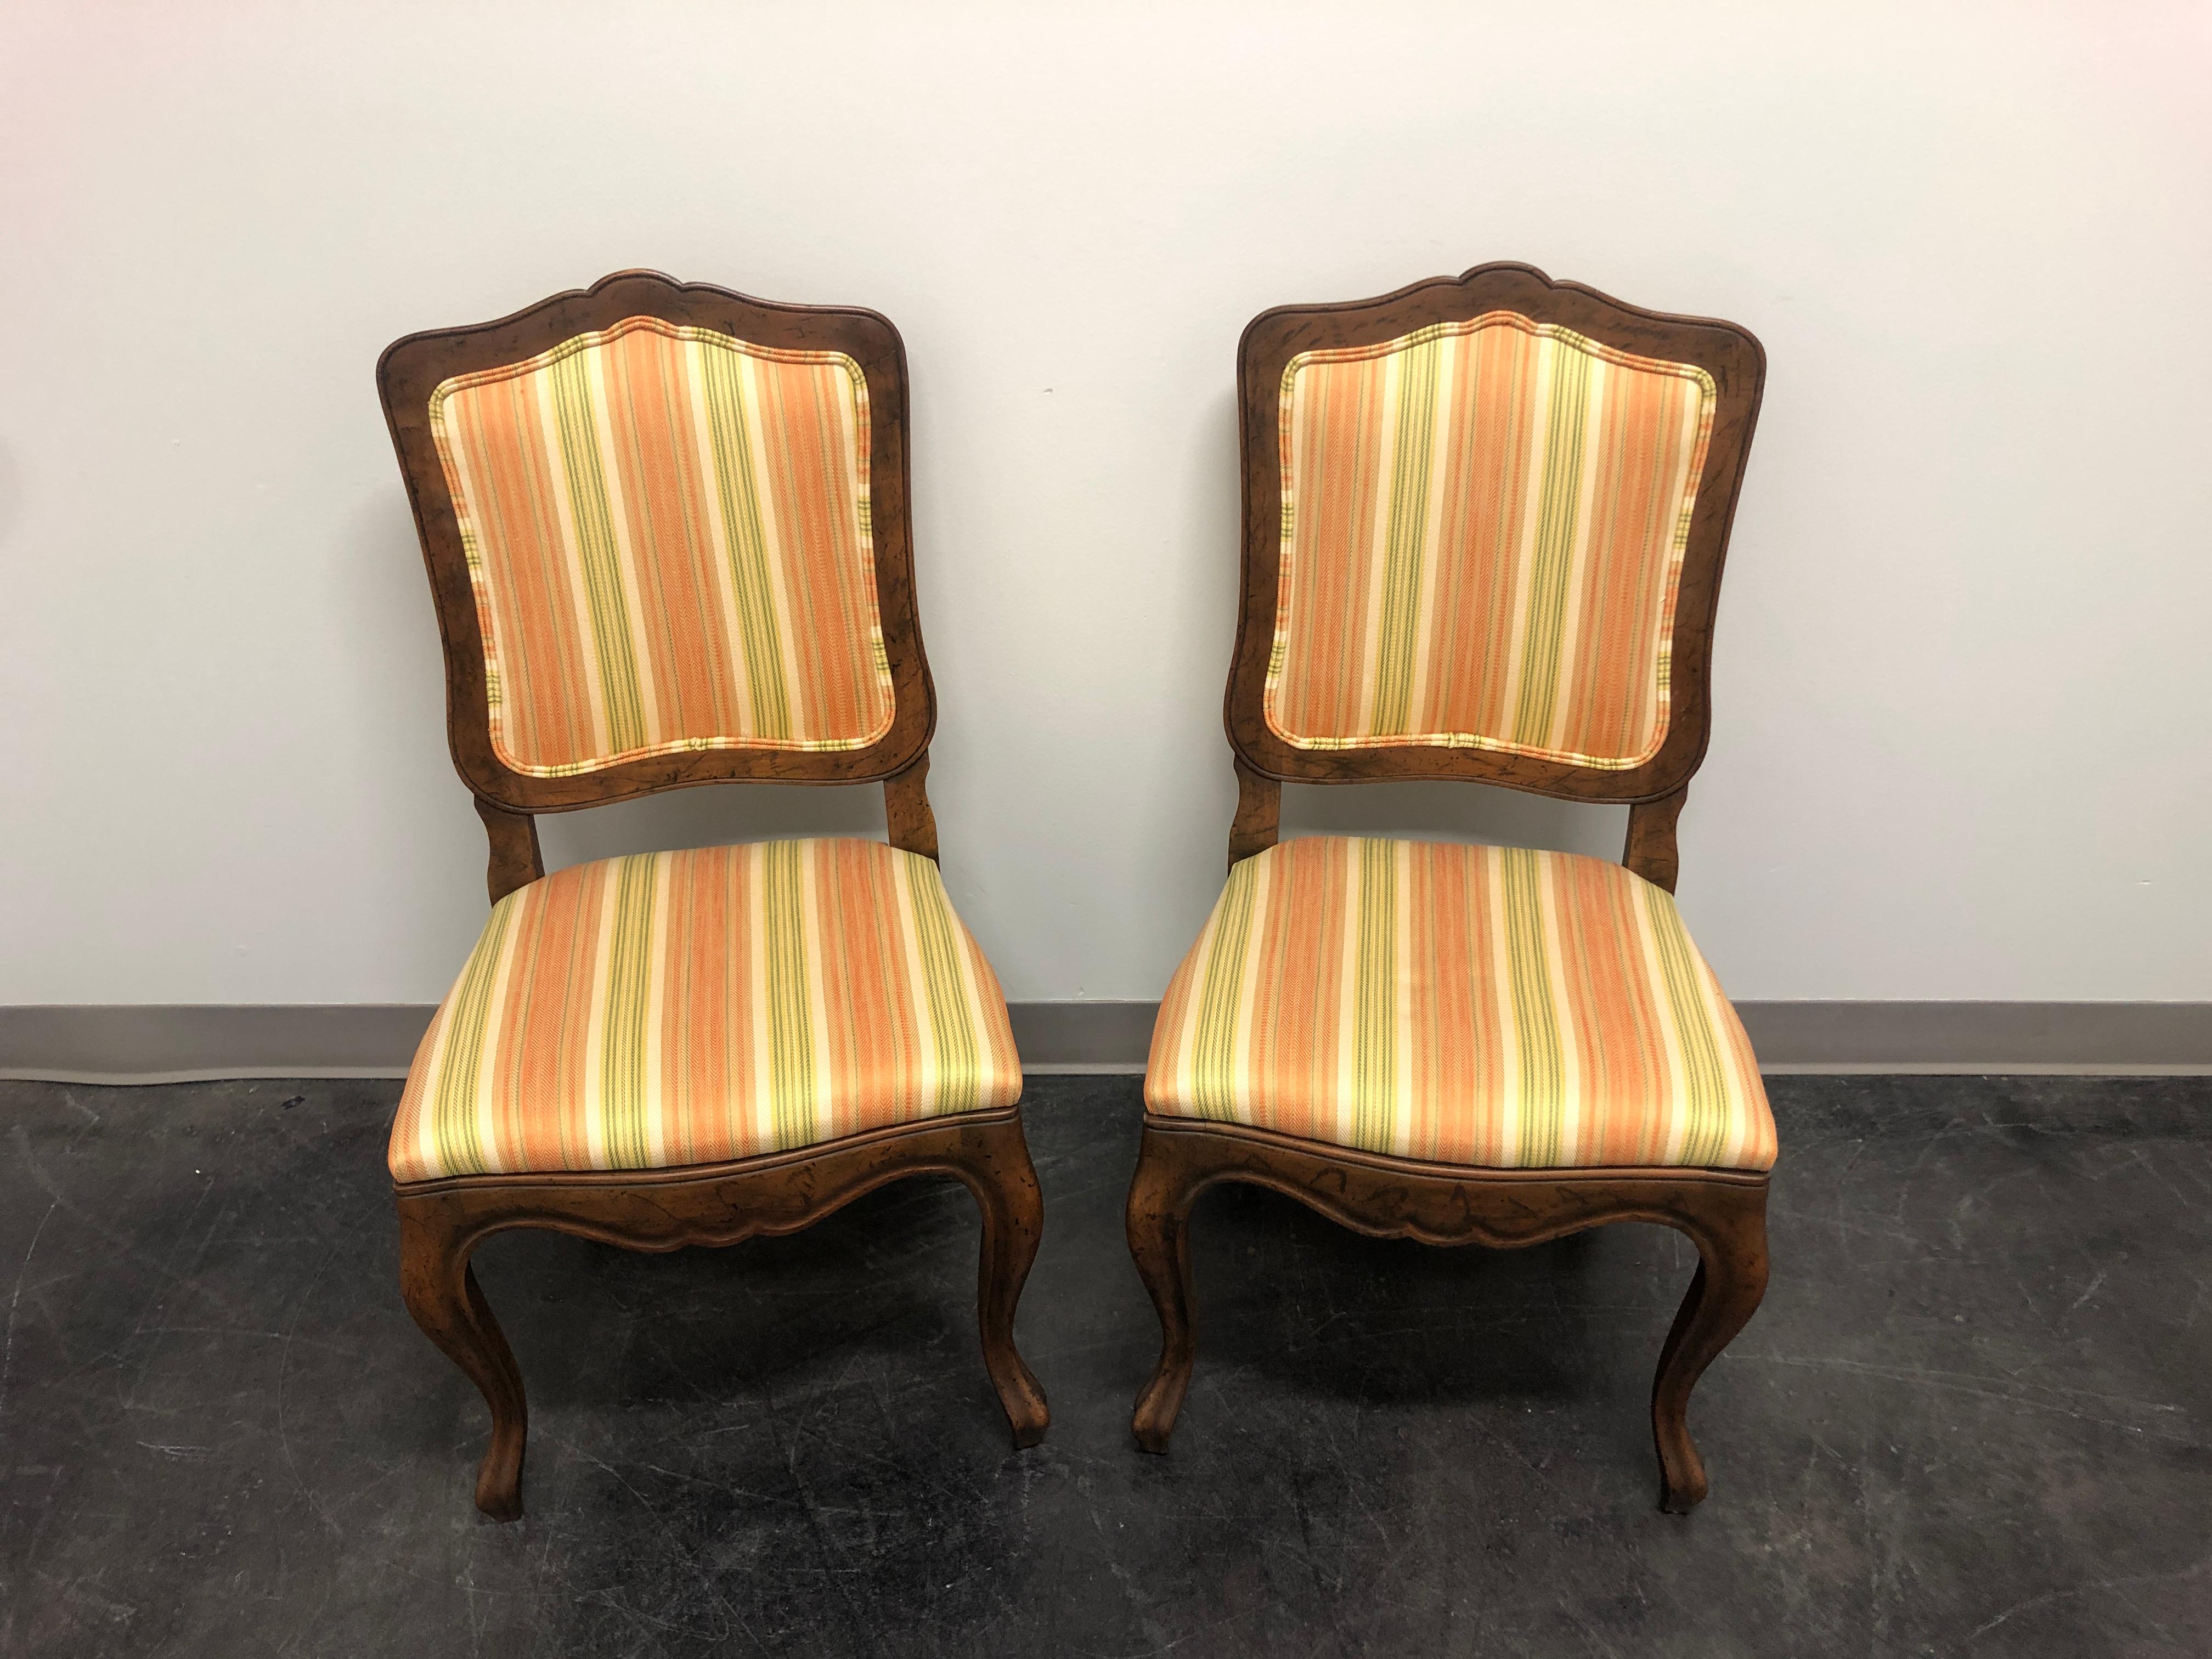 A pair of French Country style dining side chairs by Baker Furniture Company. Walnut with a distressed finish, curved legs, stripe fabric upholstered backs and seats. Made in the USA, in the late 20th Century.
 
Measures: Overall: 20 W 20 D 37 H,